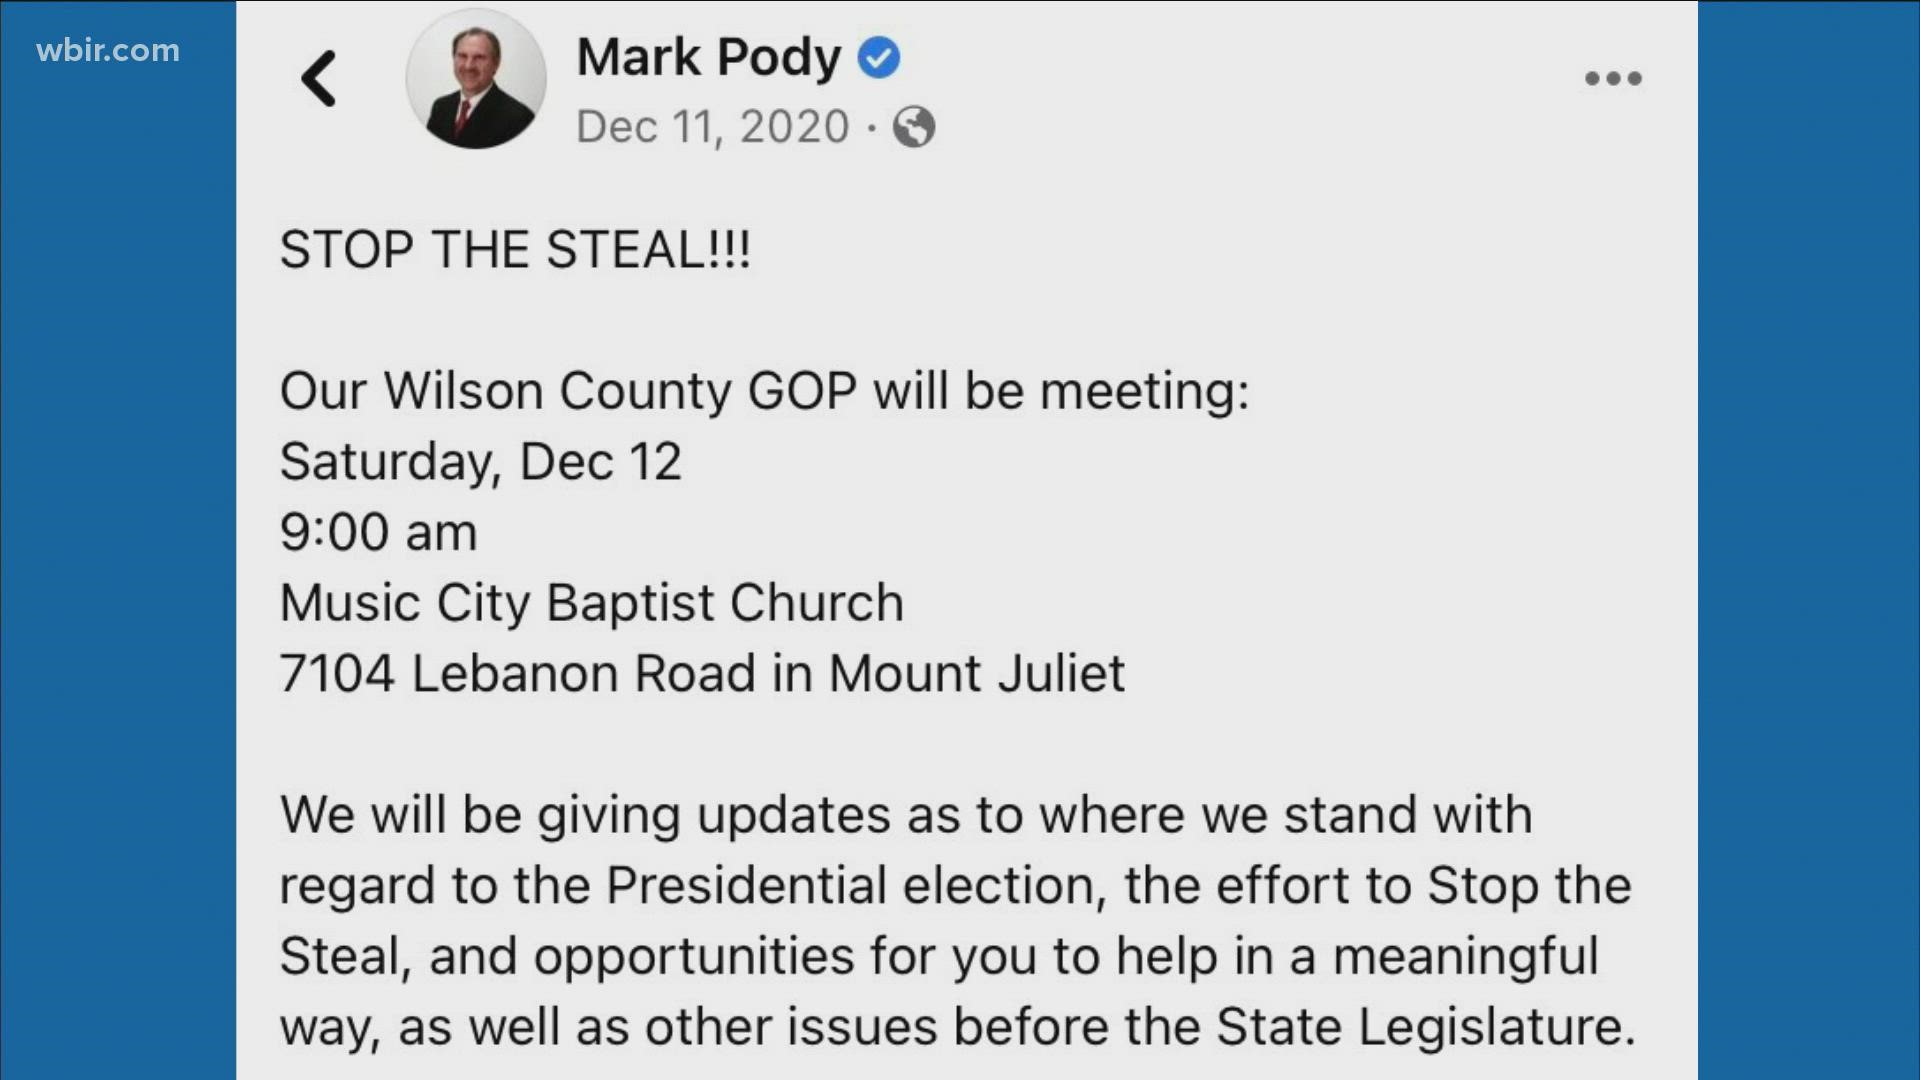 Mark Pody is a Tennessee senator who promoted a "Stop the Steal" event in December 2020 and filed a proposal to ban gay marriage in 2019.